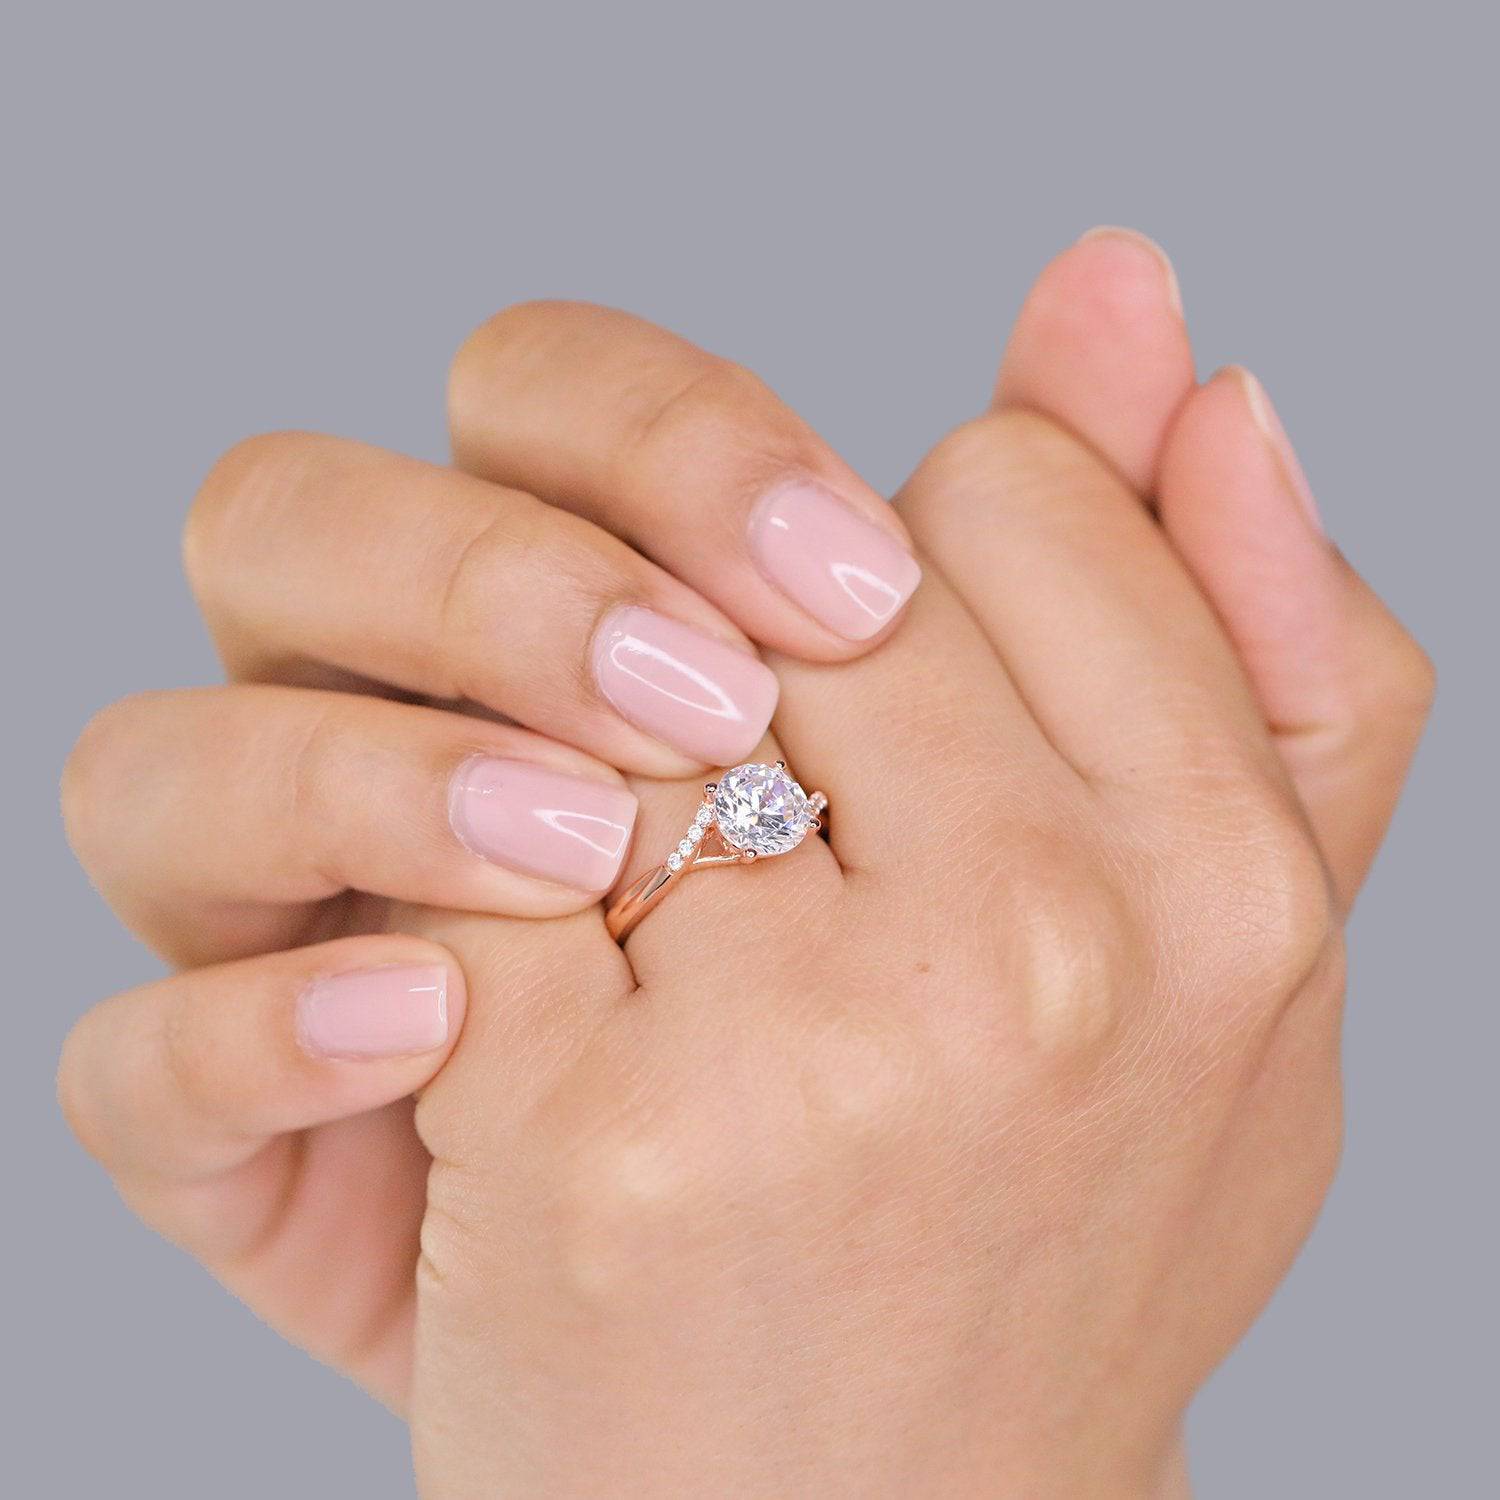 TWISTED BAND SOLITAIRE RING - Trove & Co.